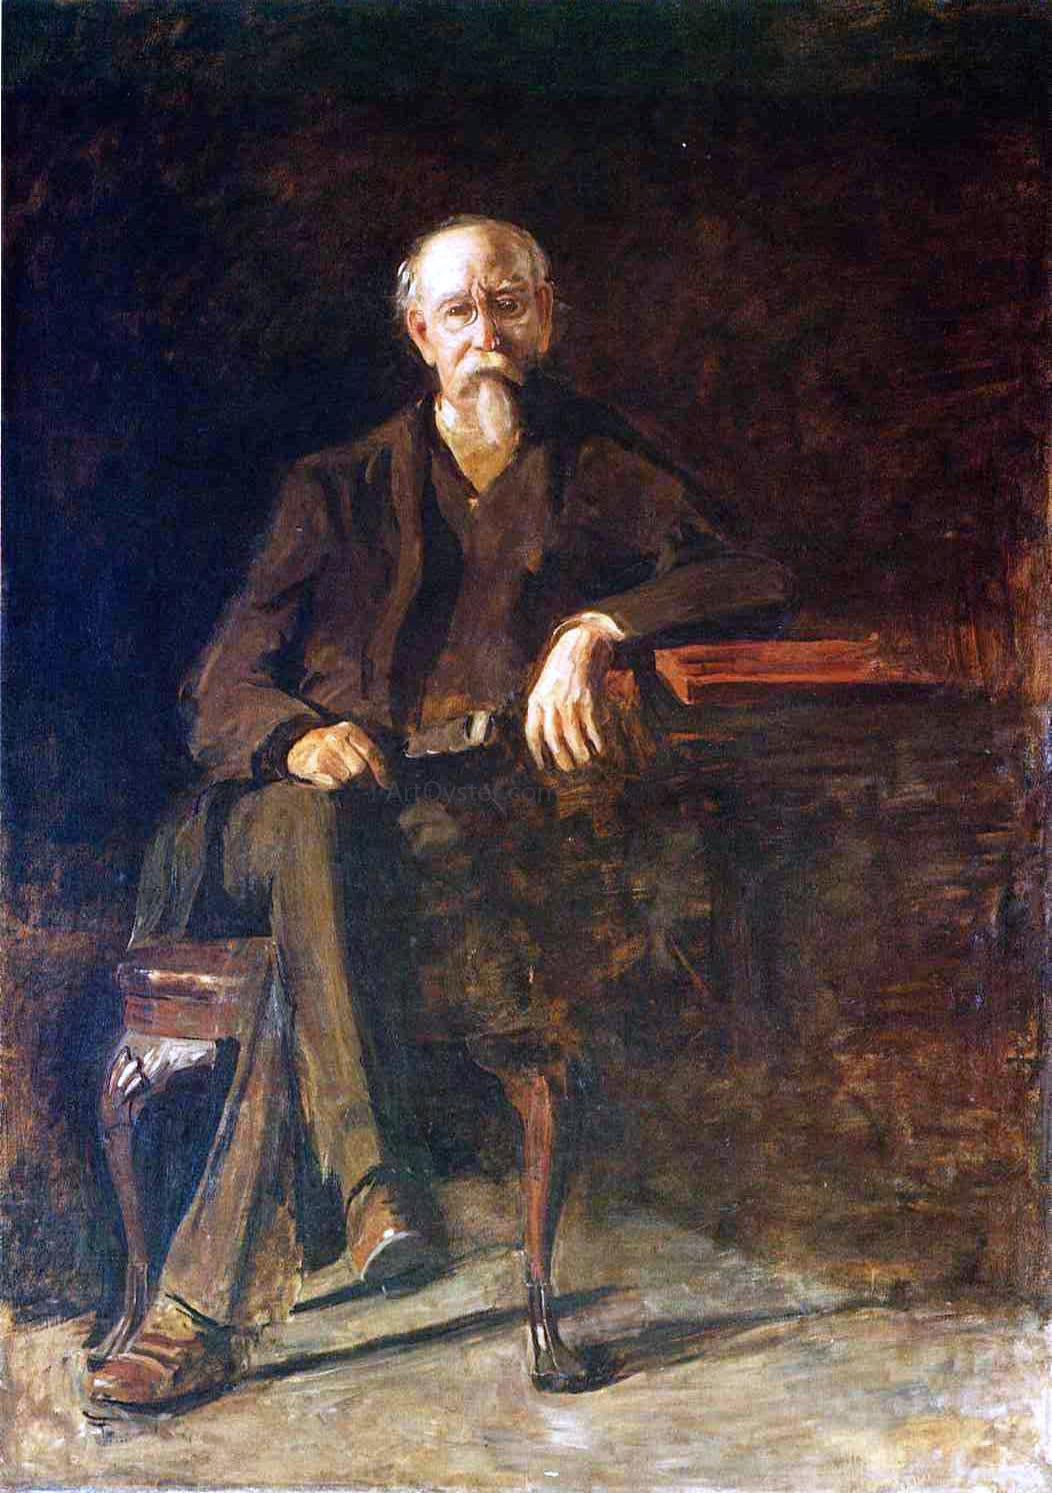  Thomas Eakins Portrait of Dr. William Thompson - Hand Painted Oil Painting